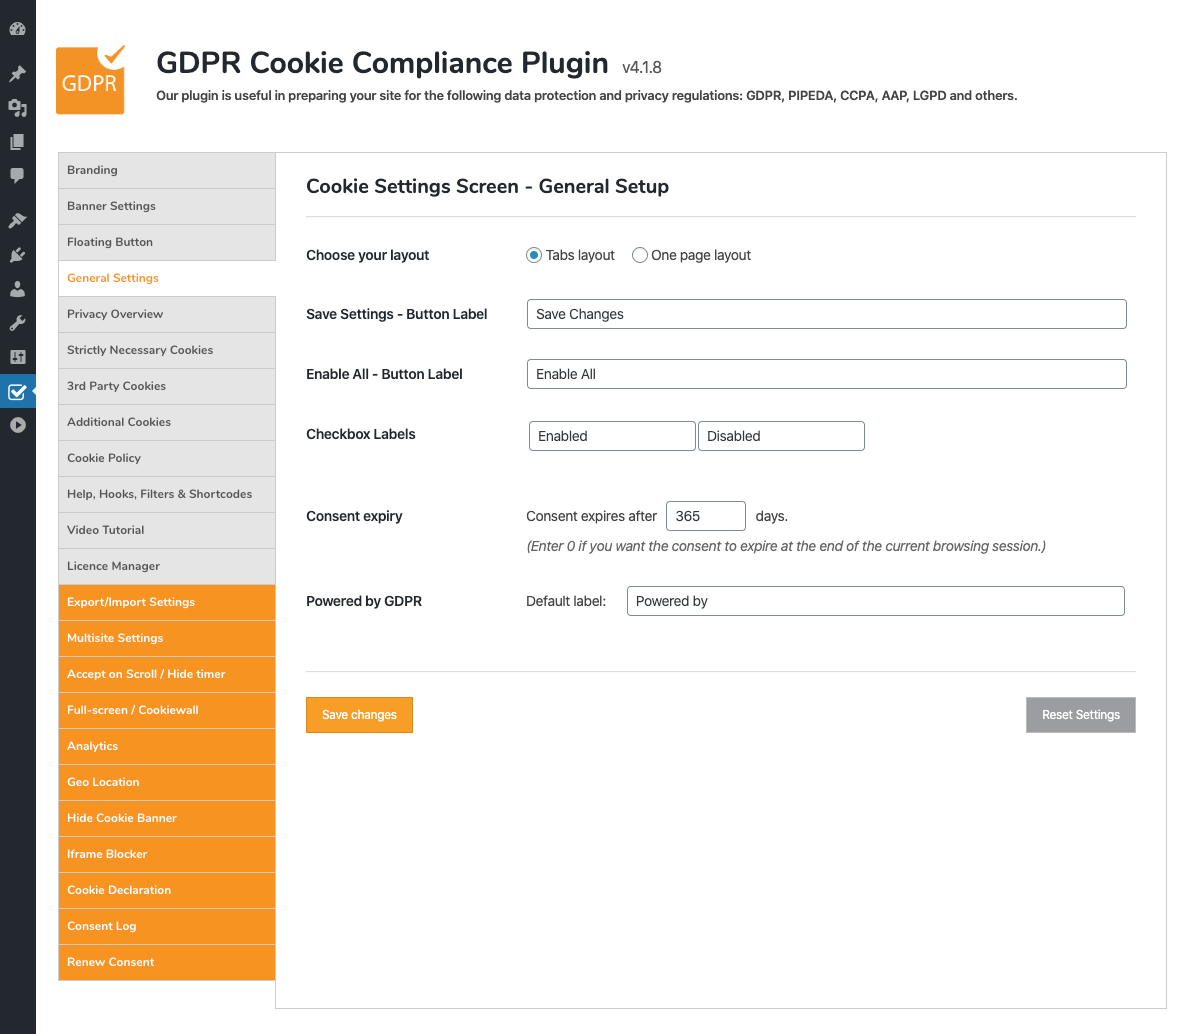 GDPR Cookie Compliance - Front-end - Full-Screen Mode [Premium]